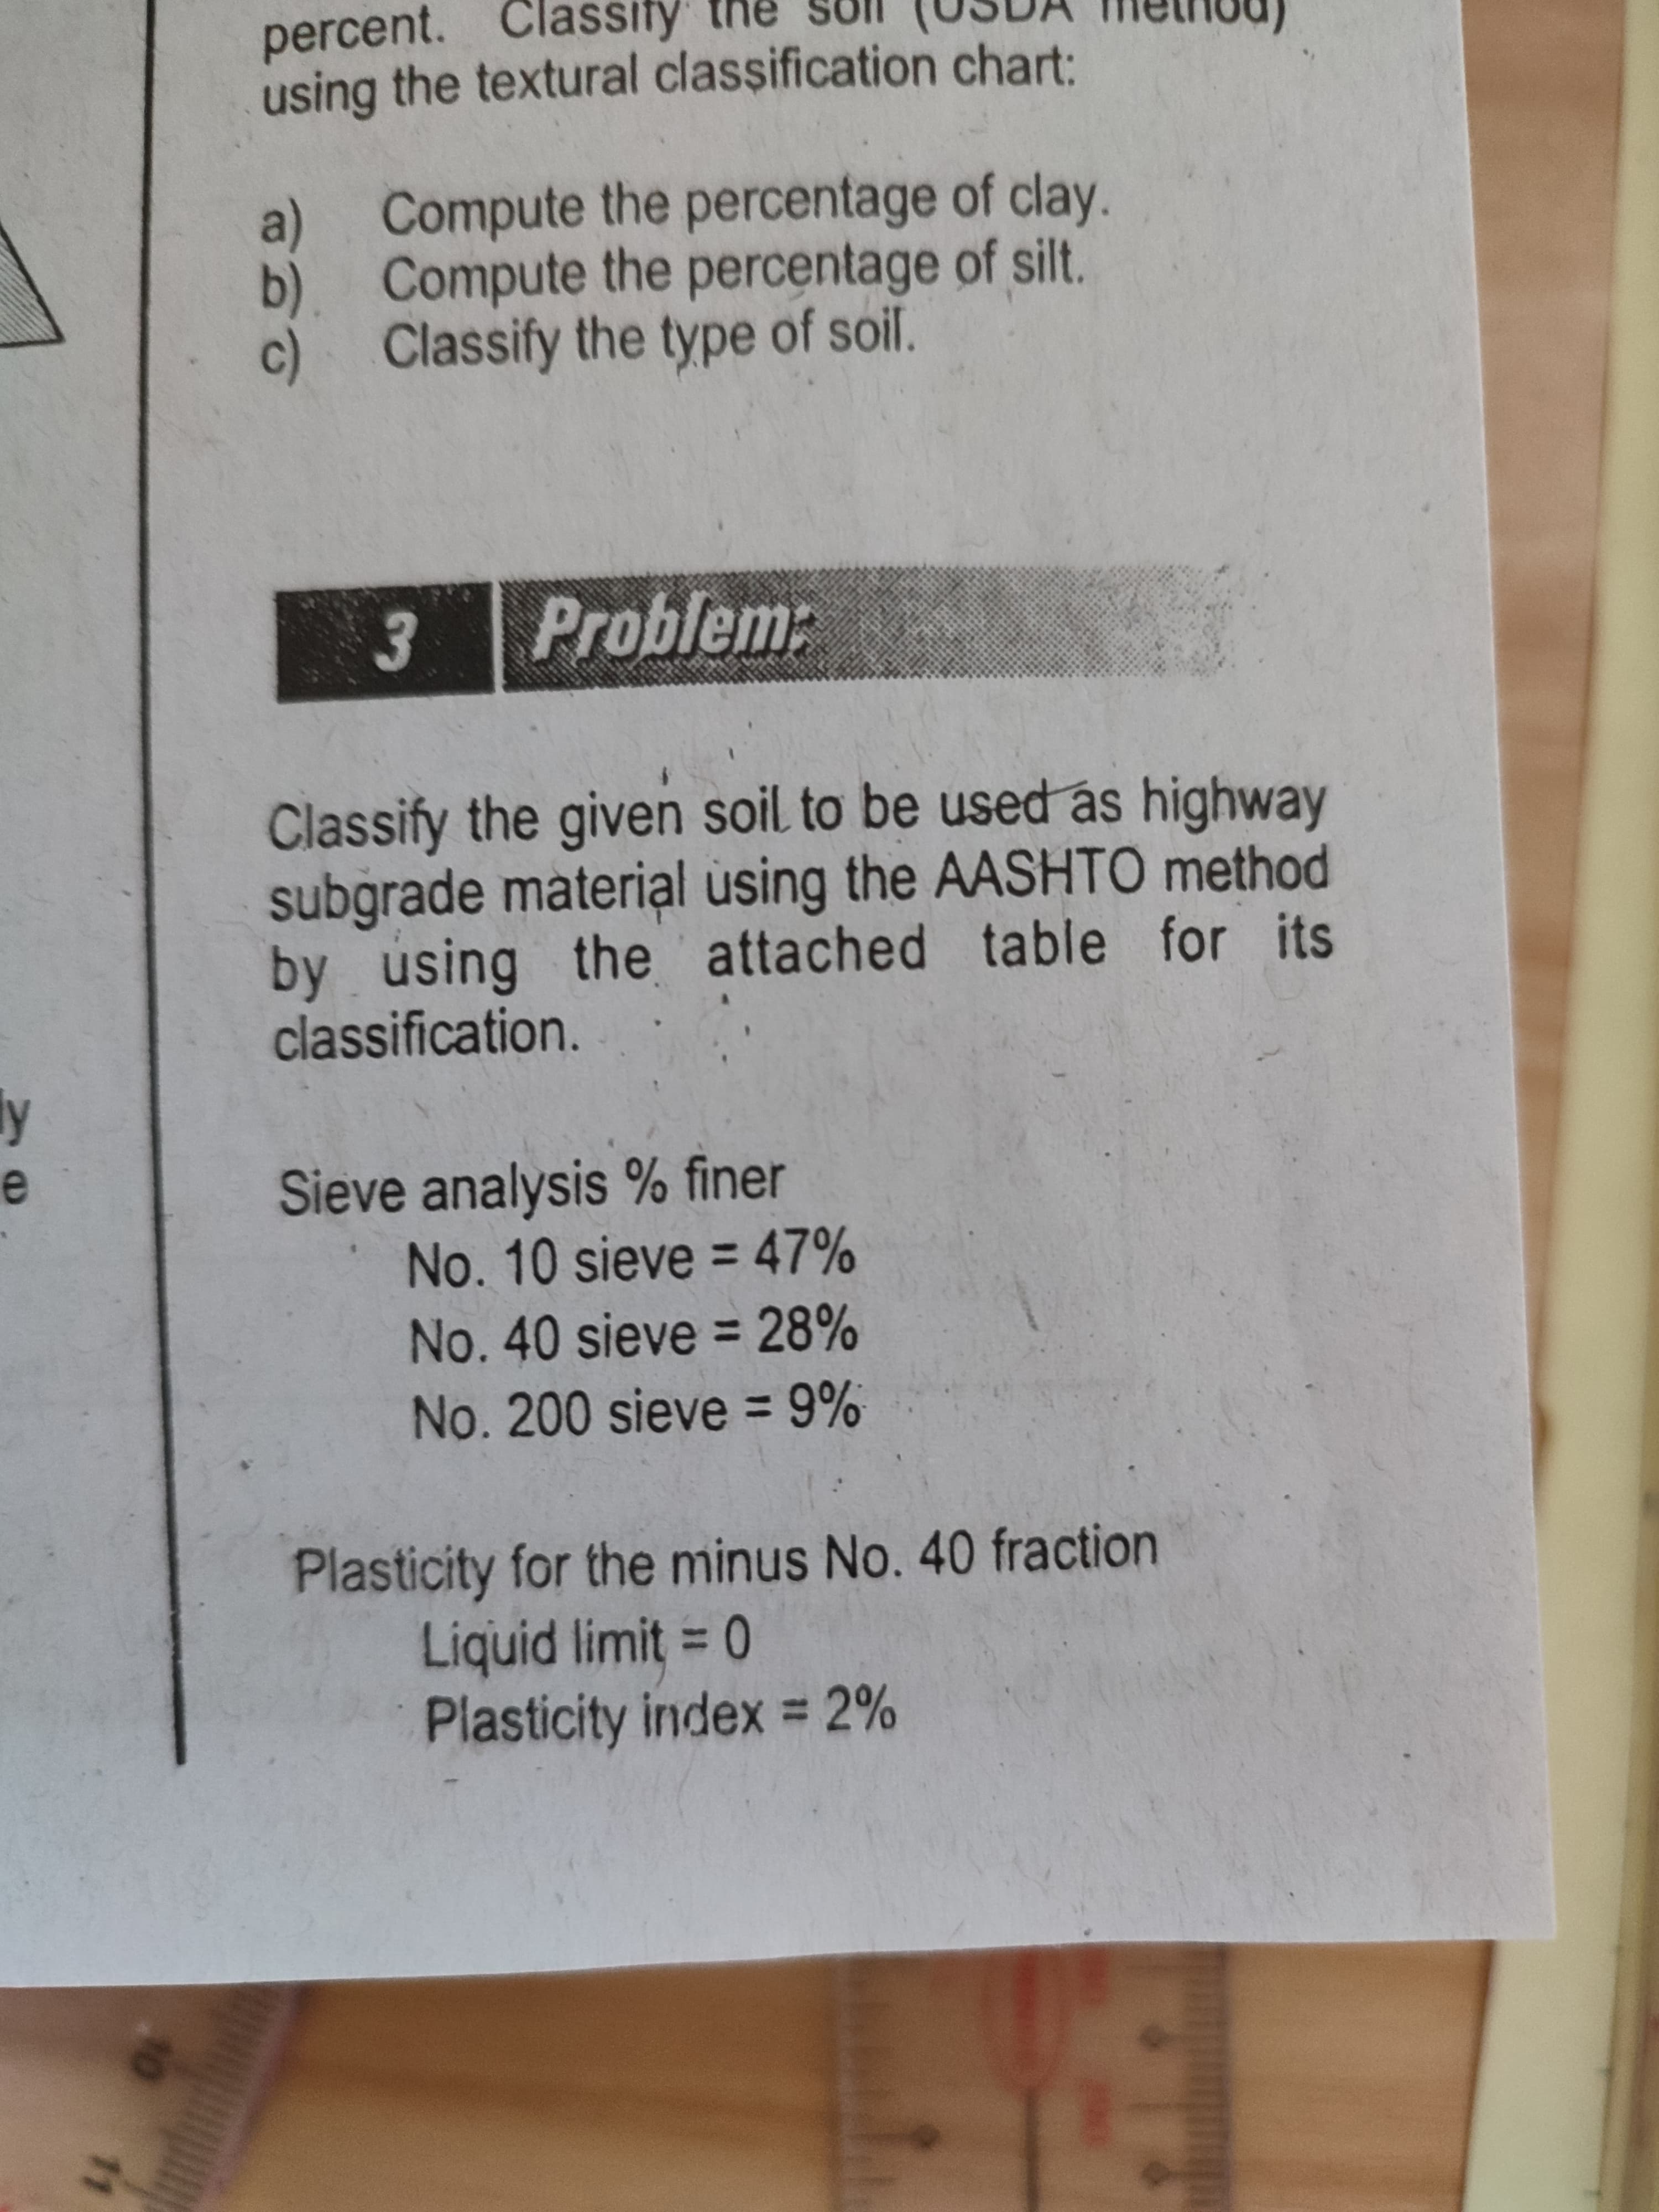 10
11
percent. Classify the
using the textural classification chart:
a) Compute the percentage of clay.
b). Compute the percentage of silt.
c) Classify the type of soil.
Problem:
soil to be used as highway
Classify the given
subgrade material using the AASHTO method
by using the attached table for its
classification.
Sieve analysis % finer
No. 10 sieve = 47%
%3D
No.40 sieve = 28%
No.200 sieve = 9%
Plasticity for the minus No. 40 fraction
Liquid limit 0
Plasticity index = 2%
